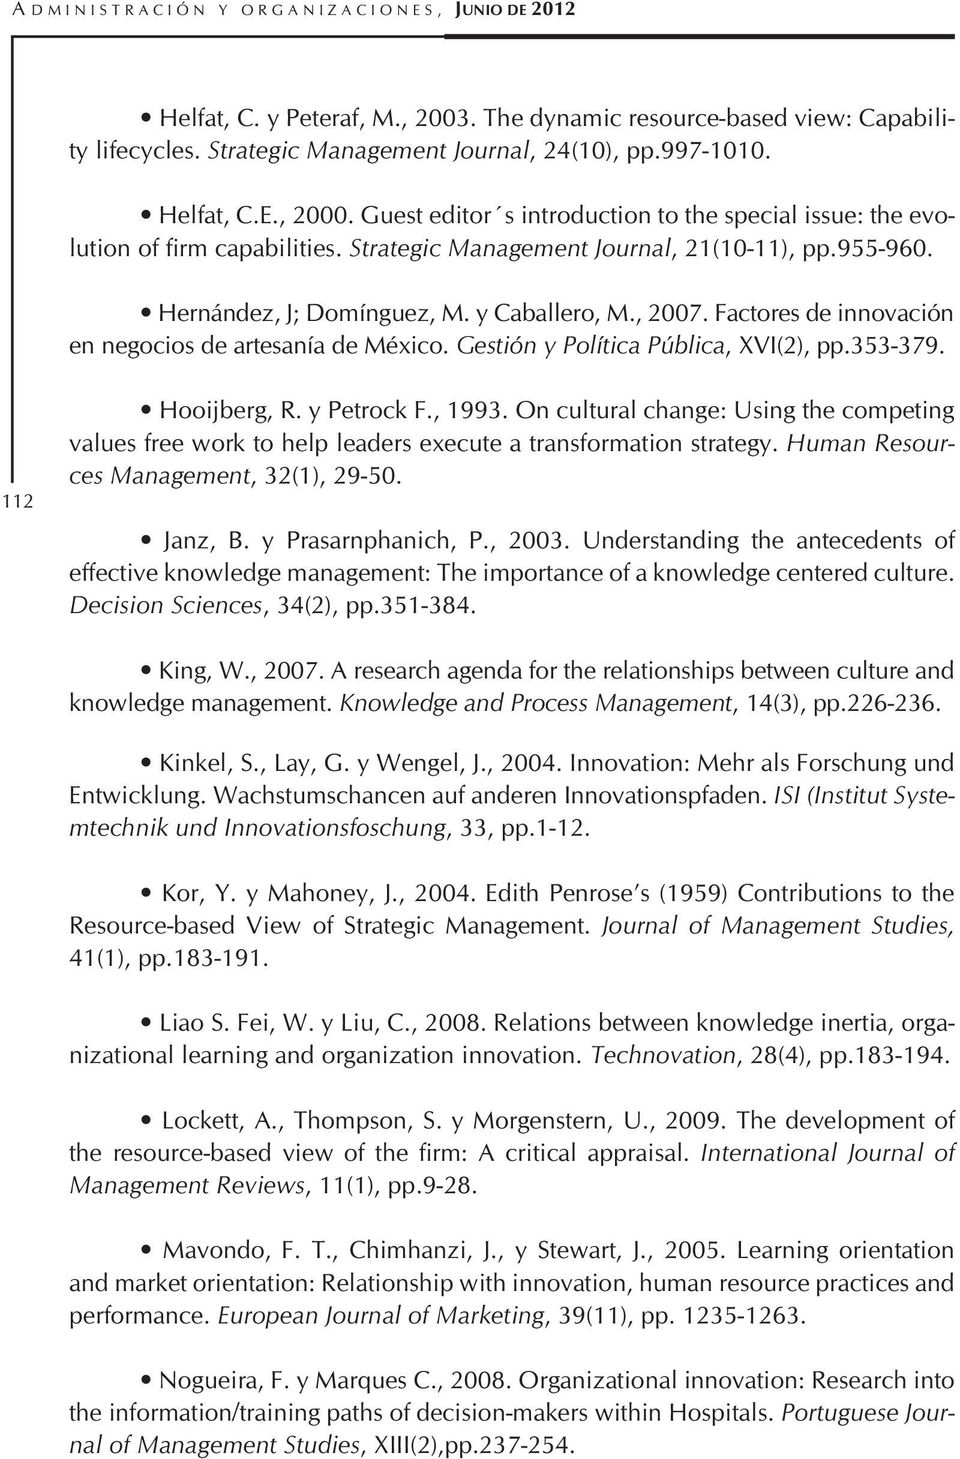 effective knowledge management: The importance of a knowledge centered culture. Decision Sciences, 34(2), pp.351-384. knowledge management. Knowledge and Process Management, 14(3), pp.226-236.